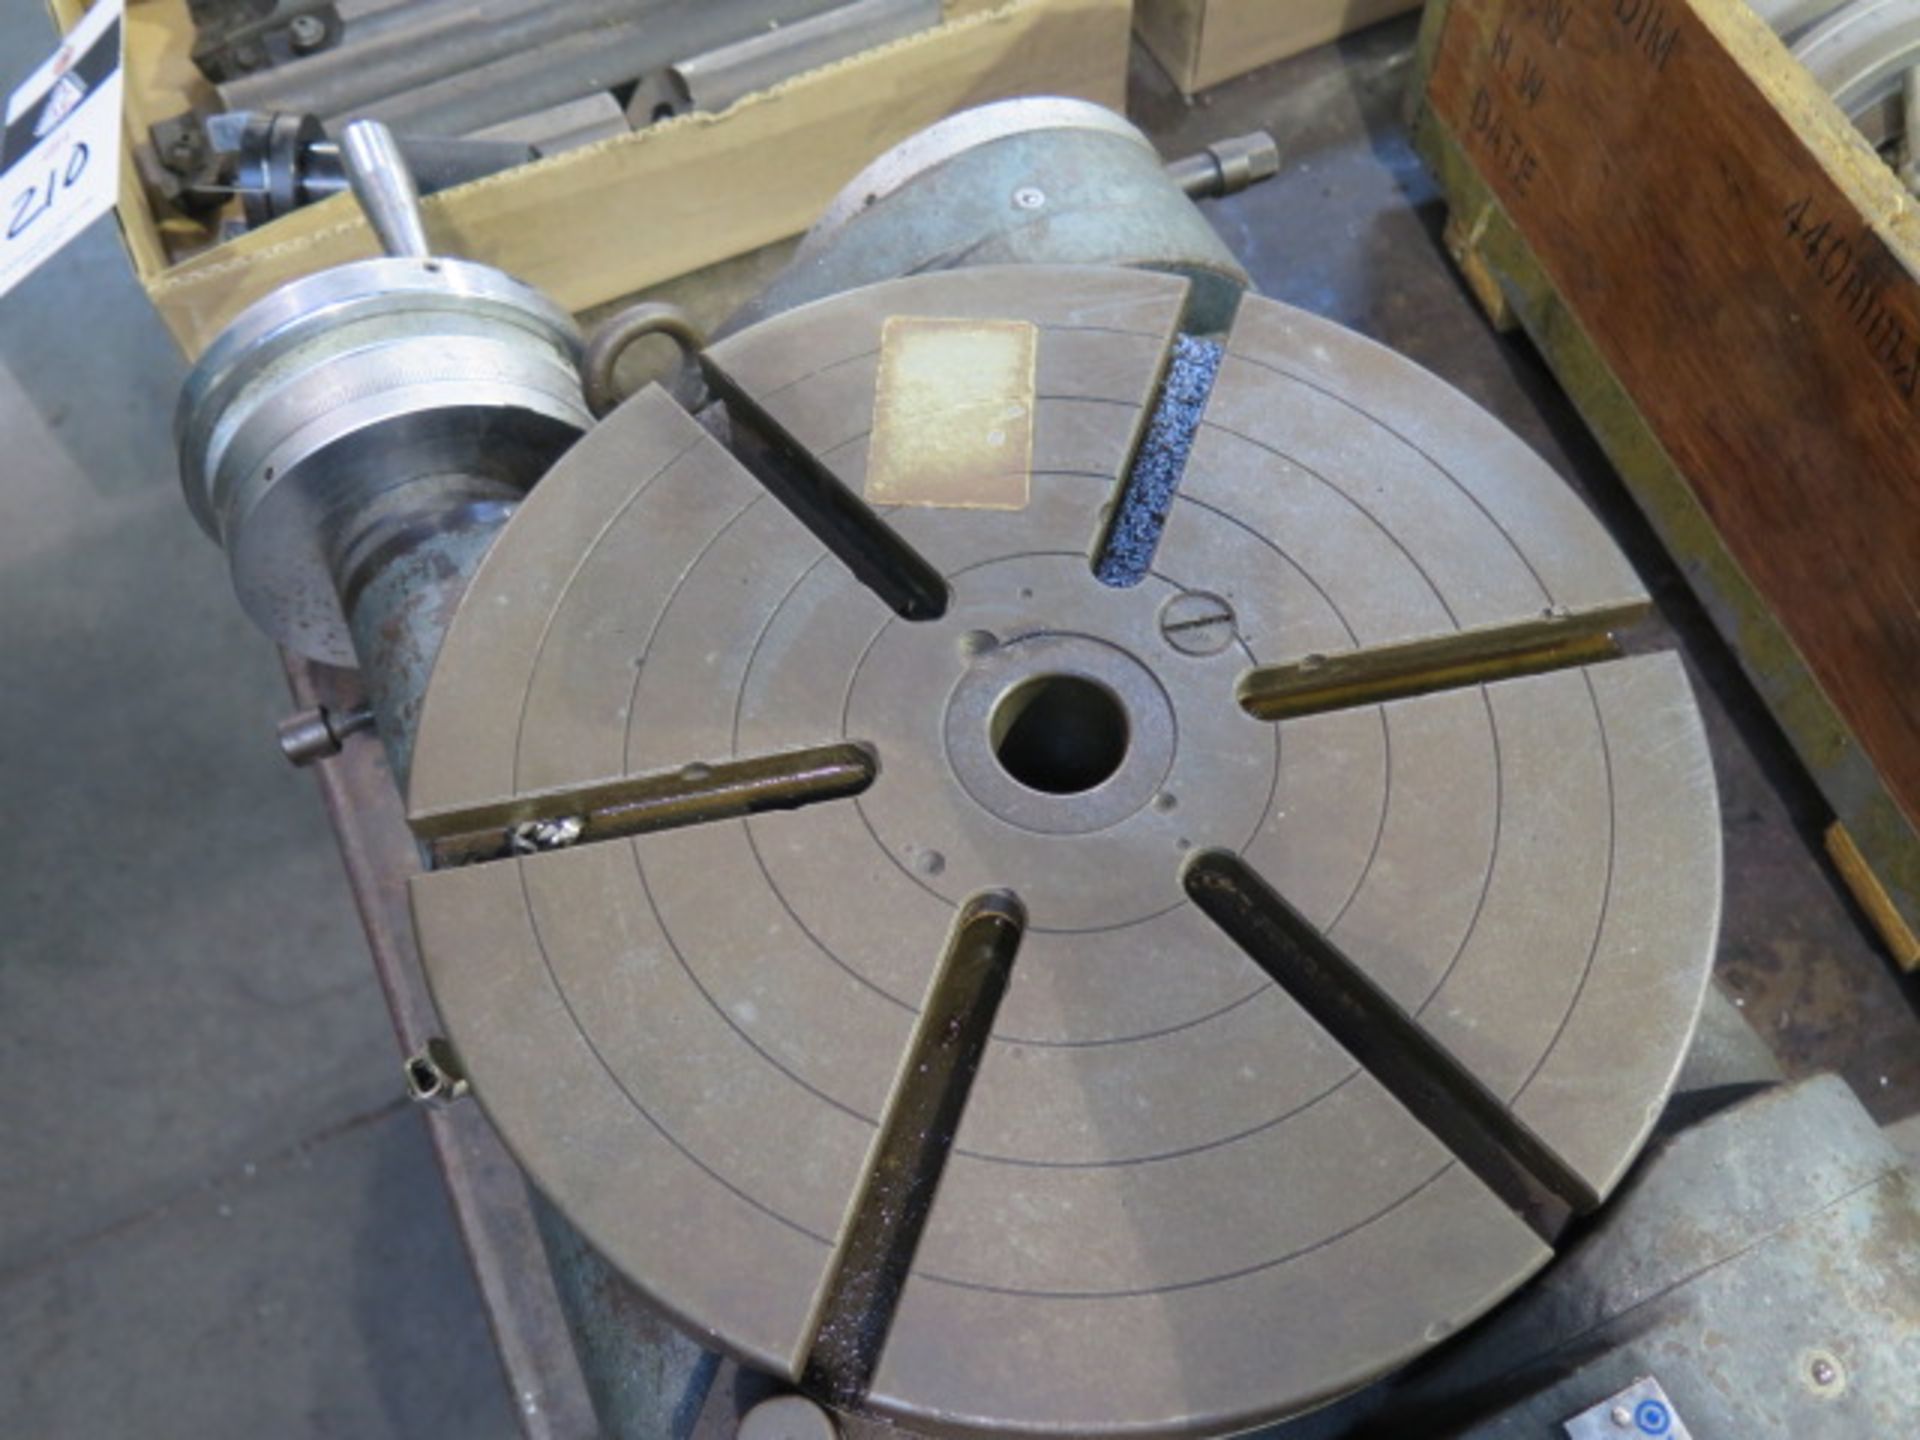 Yuasa 12" Compound Rotary Table (SOLD AS-IS - NO WARRANTY) - Image 4 of 5